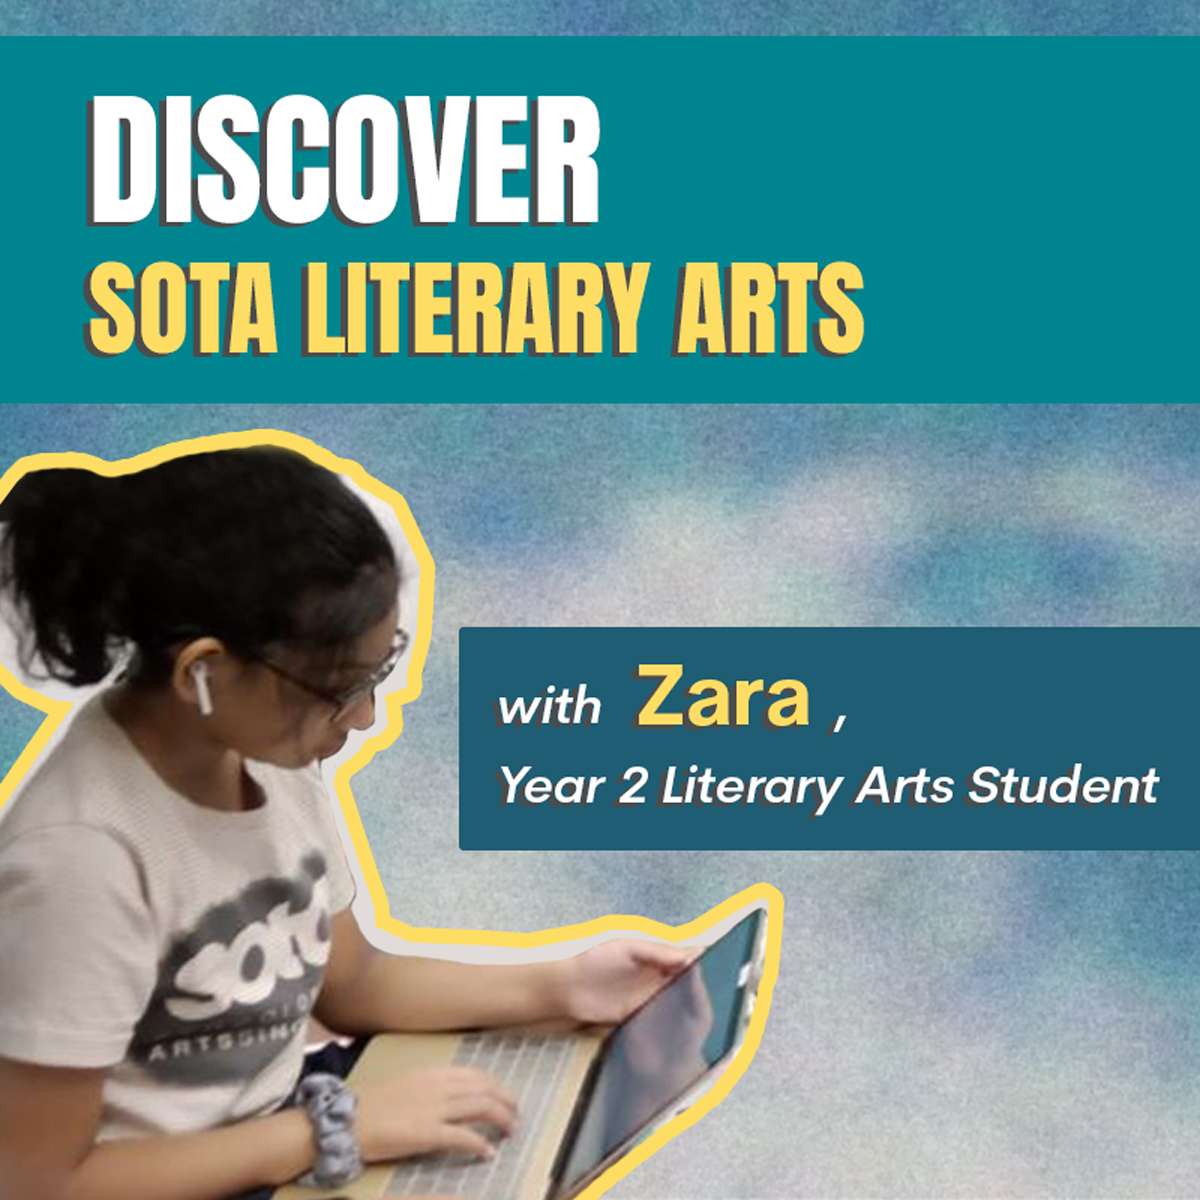 sota creative writing competition 2022